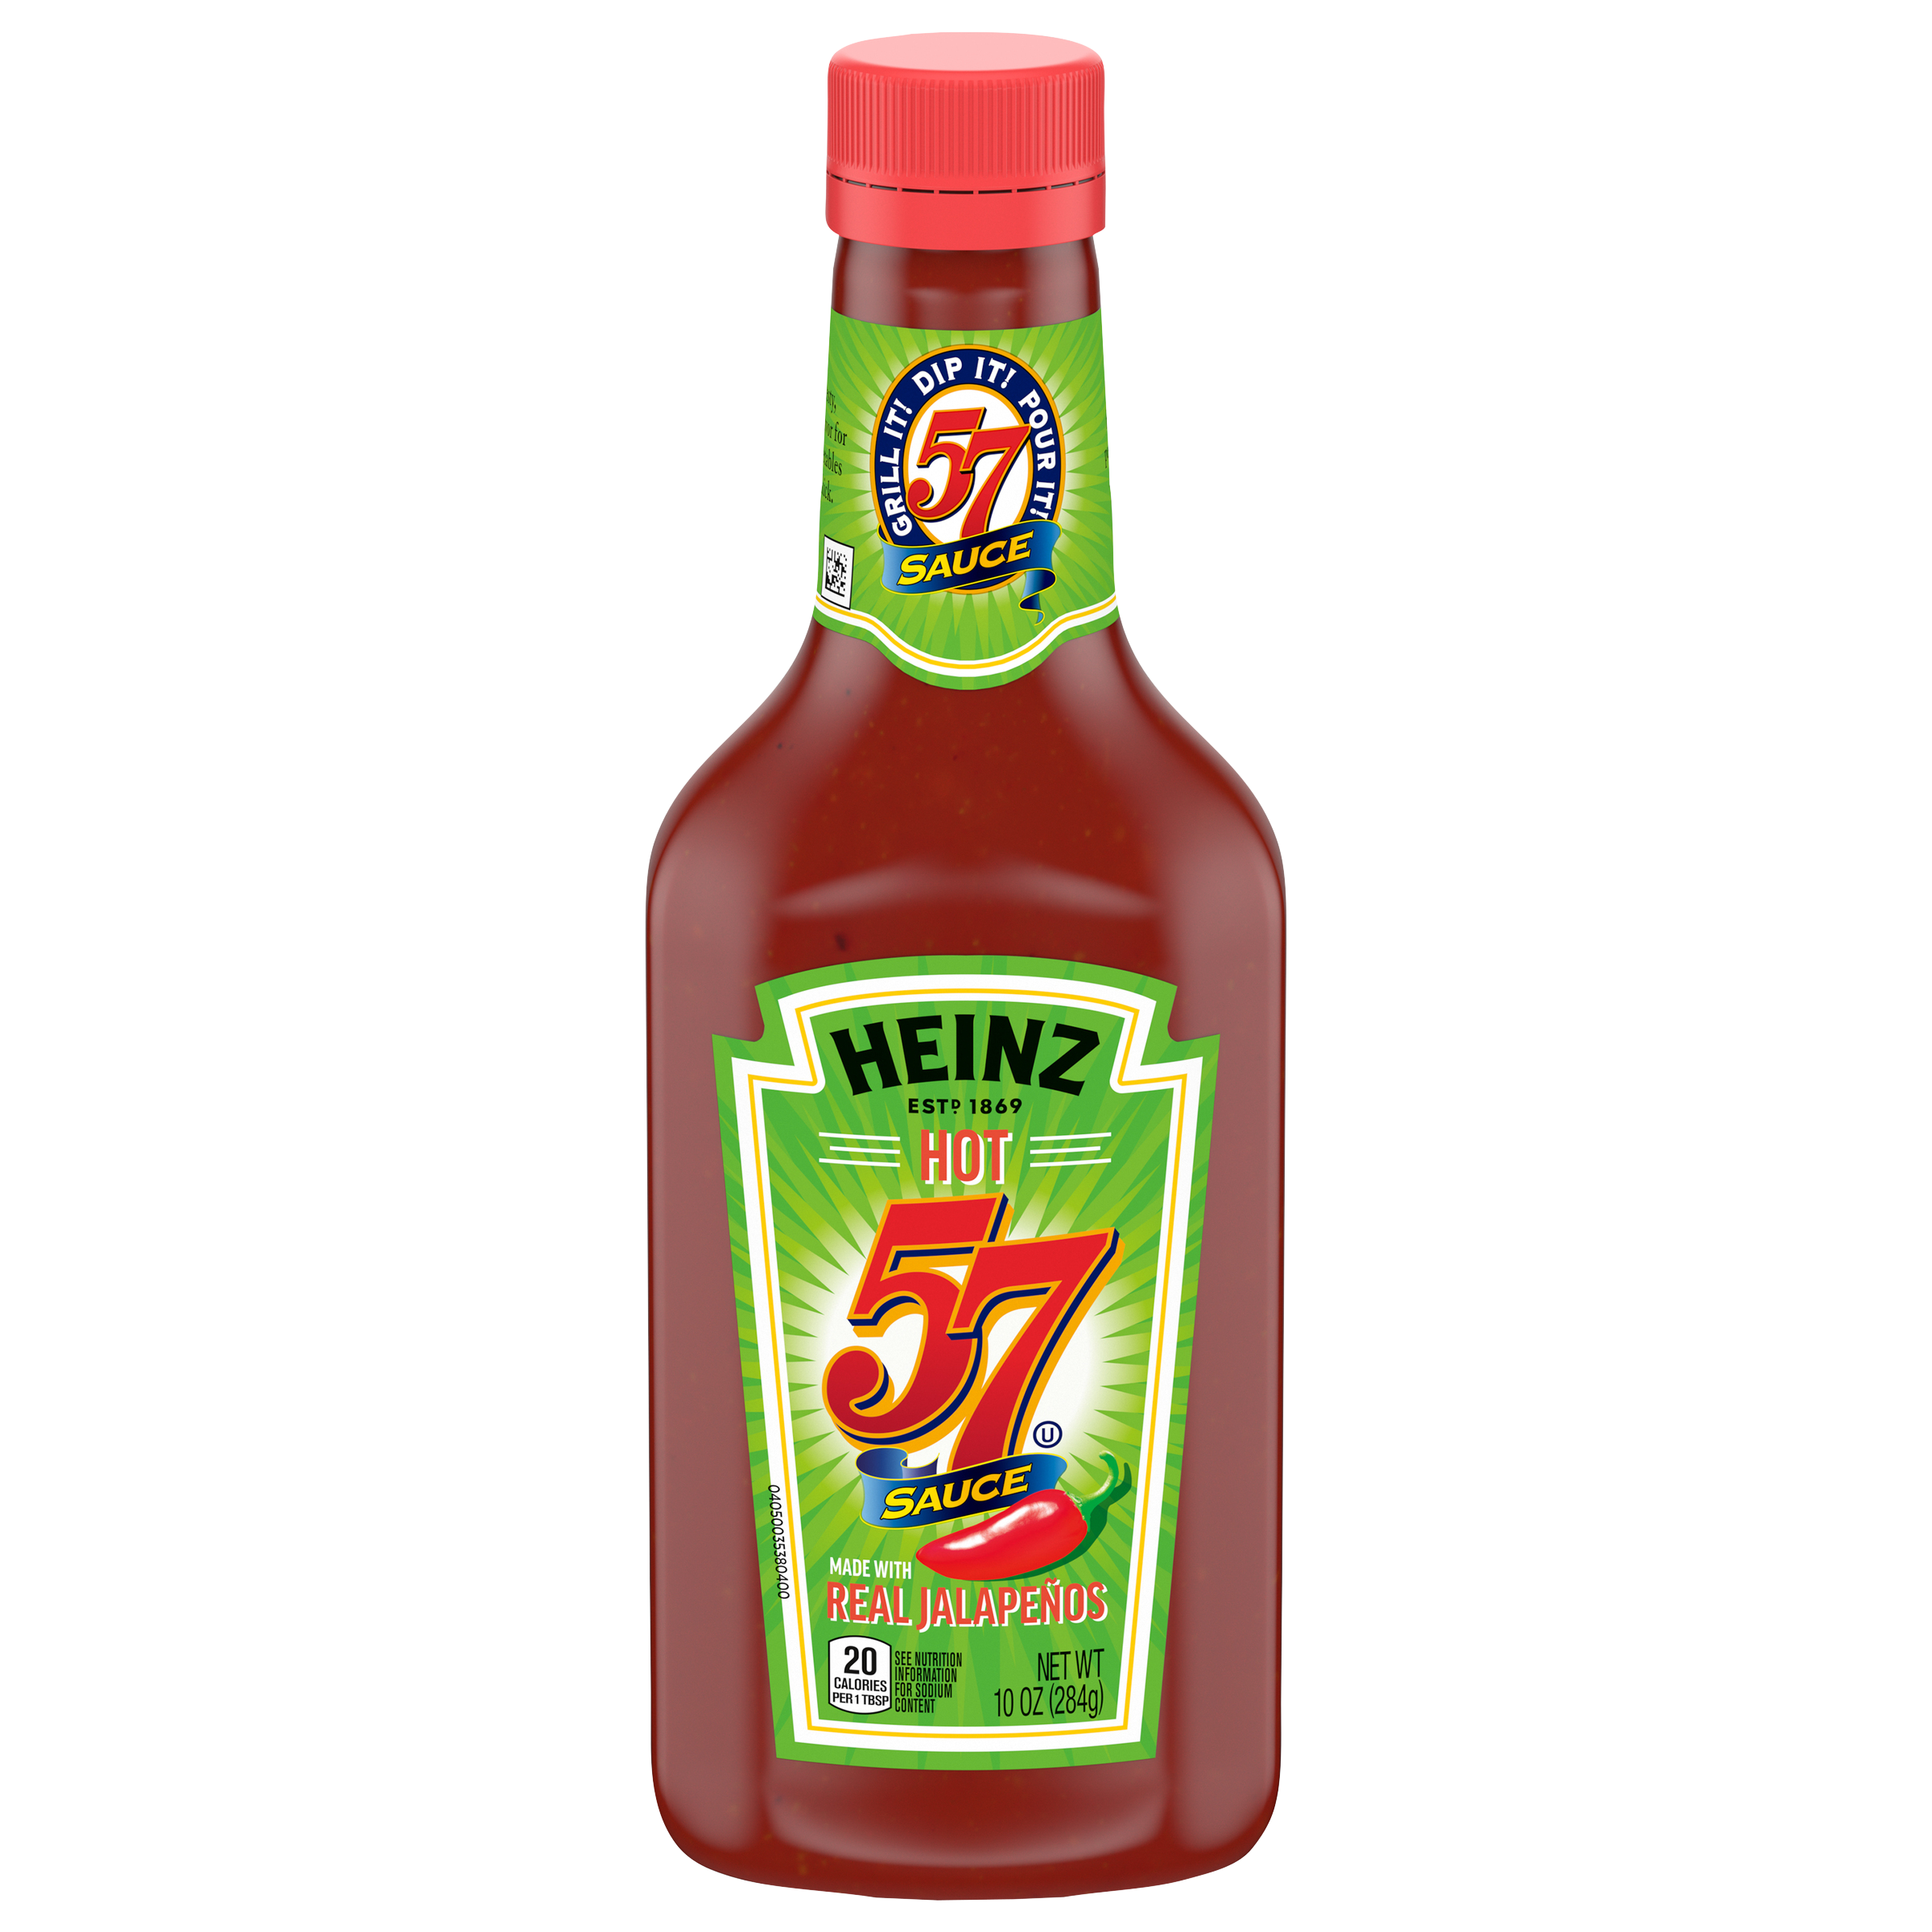 Hot 57 Sauce - Products - Heinz®